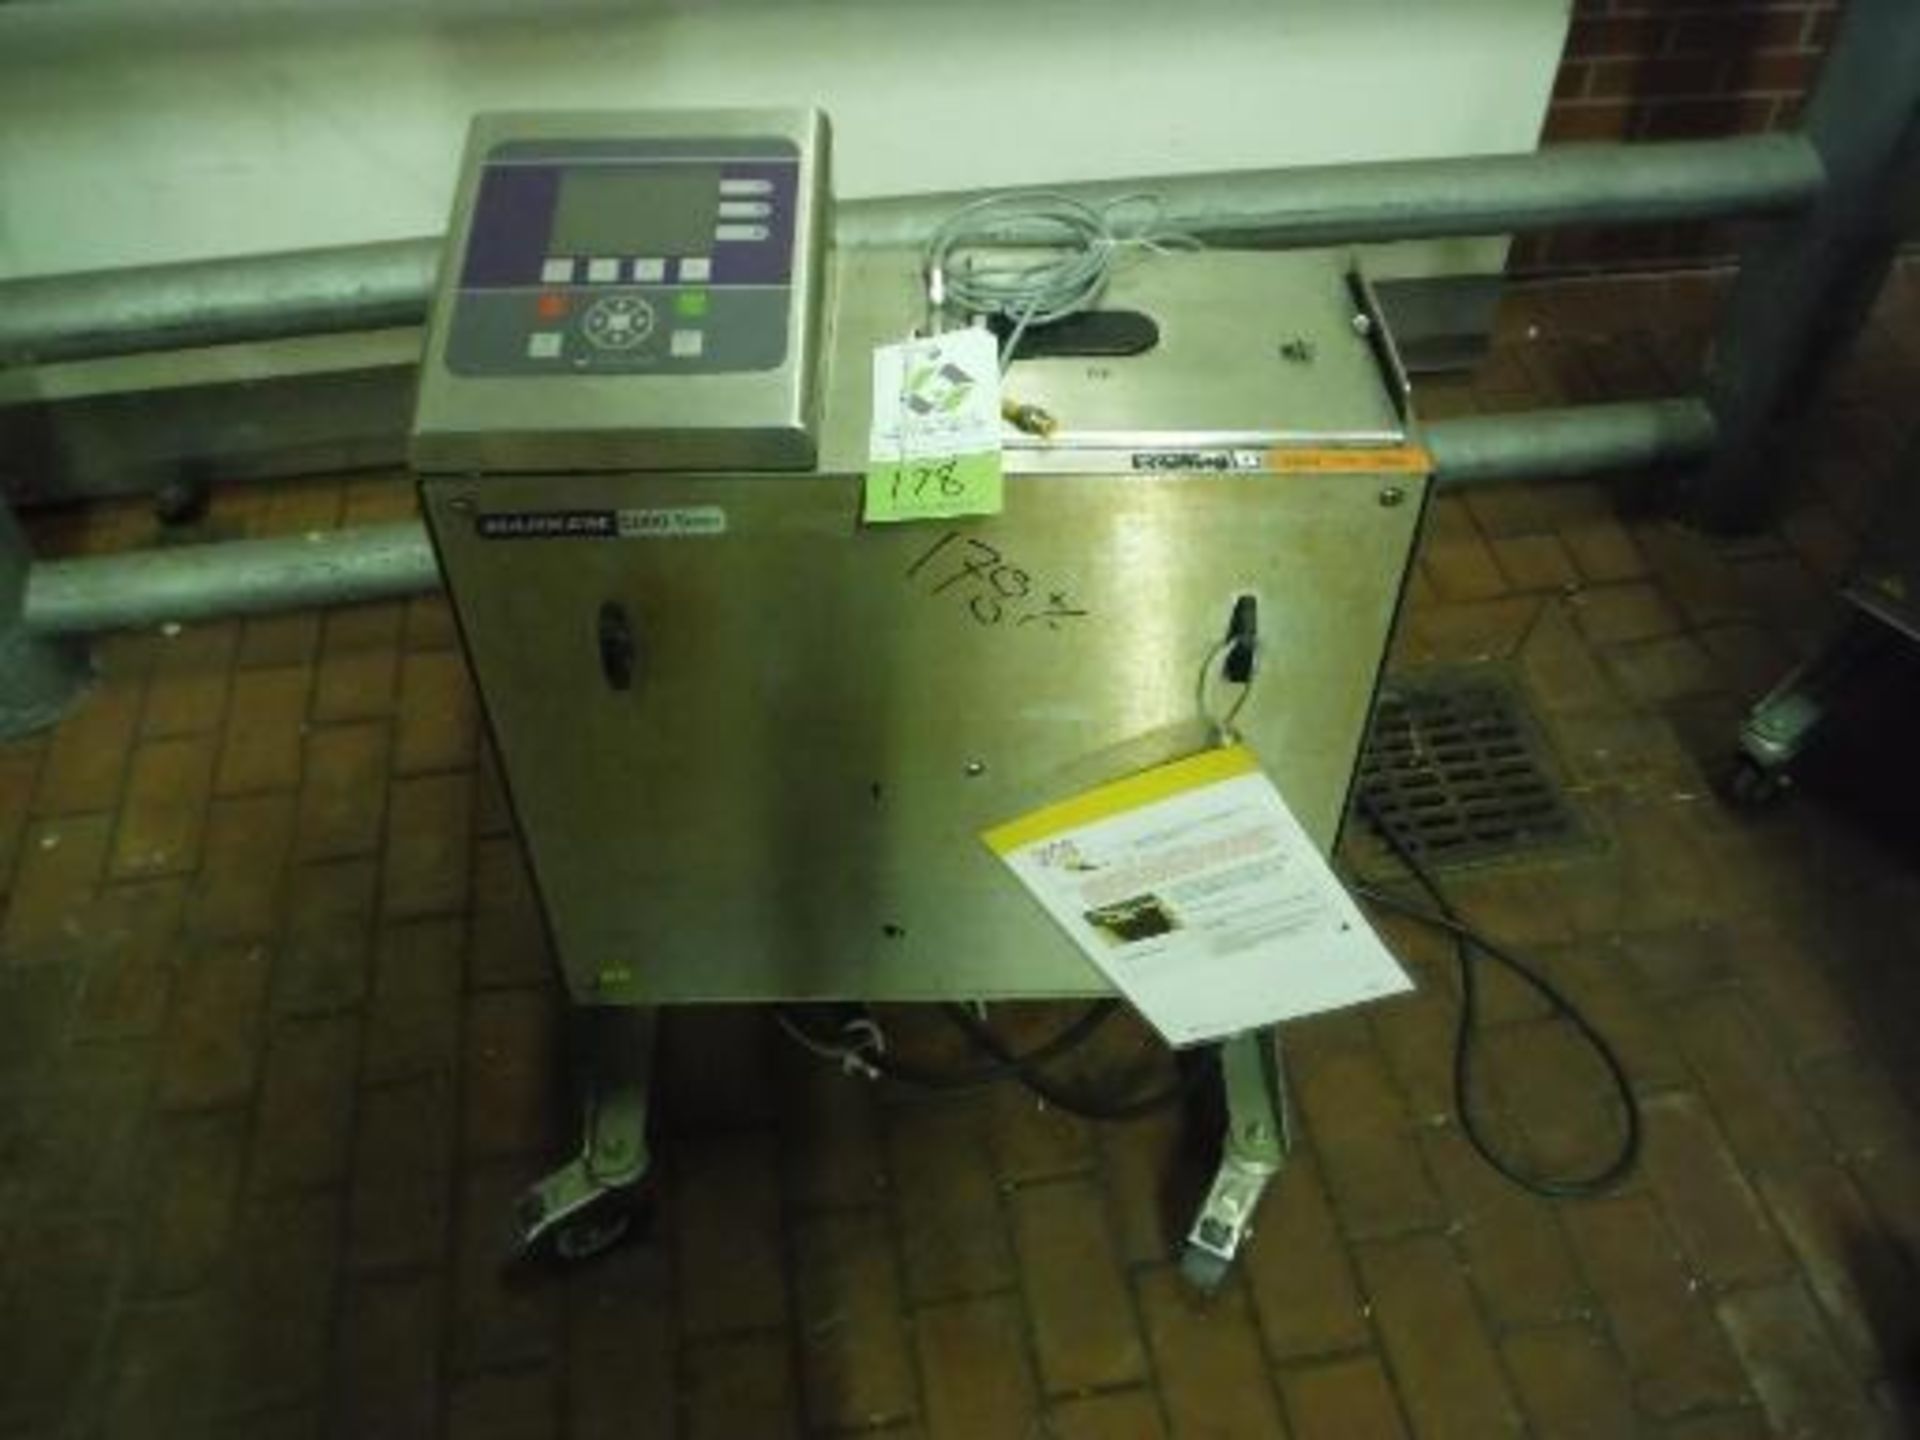 Markem code dater 5000 series, Model 5400, SN 033164 (ET-31865) This Item Is Located in Quincy,